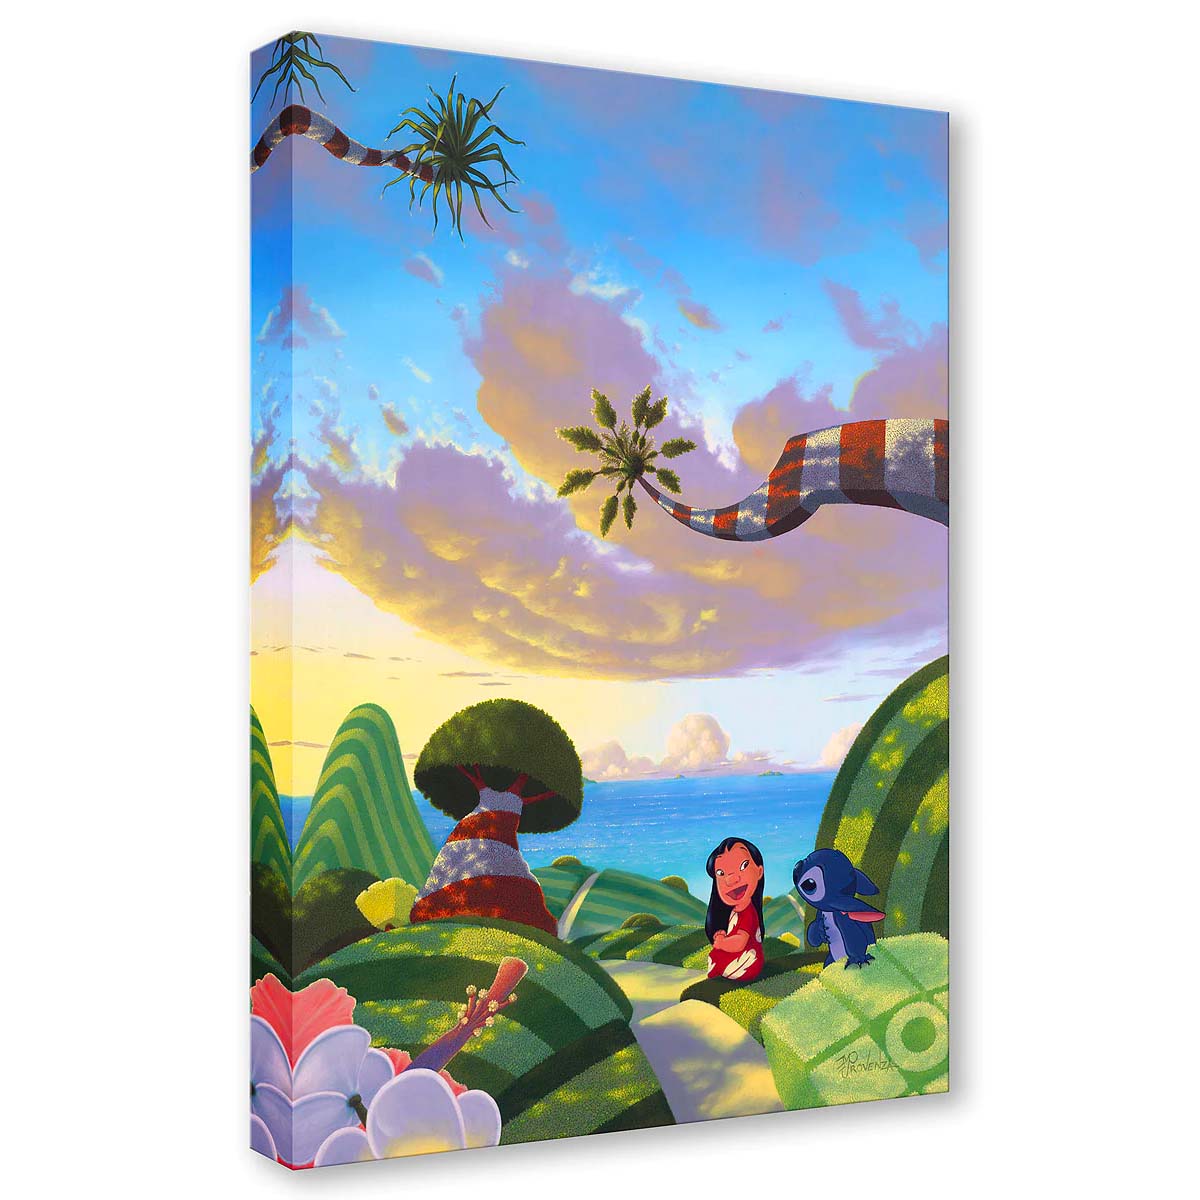 Michael Provenza Disney "A Tropical Idea" Limited Edition Canvas Giclee